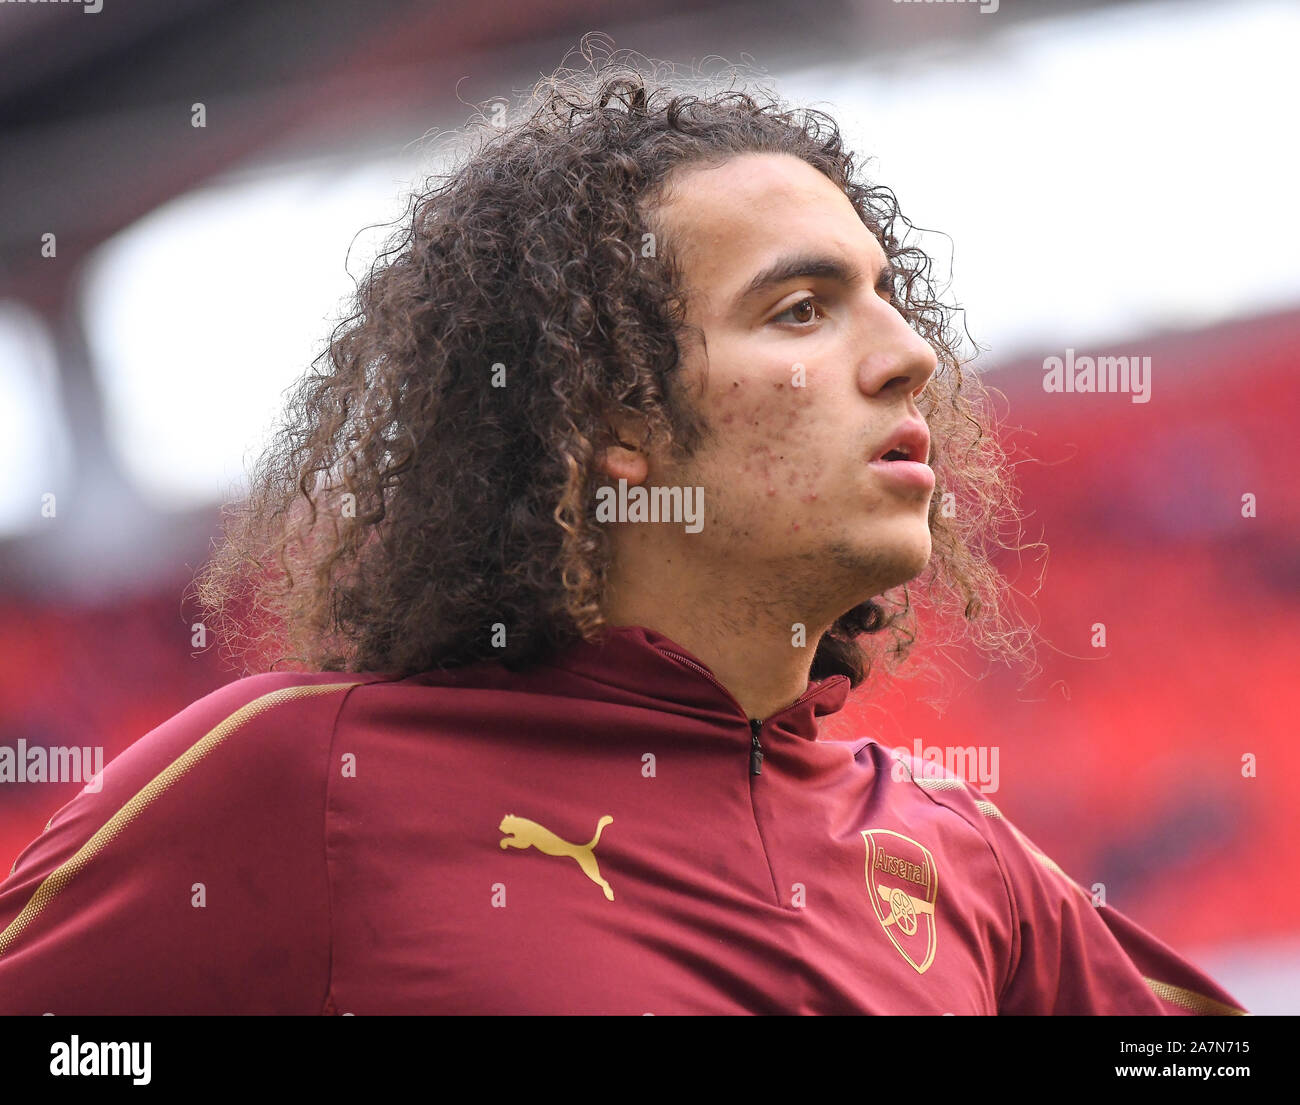 LONDON, ENGLAND - MARCH 2, 2019: Matteo Guendouzi of Arsenal pictured ahead of the 2018/19 Premier League game between Tottenham Hotspur and Arsenal FC at Wembley Stadium. Stock Photo